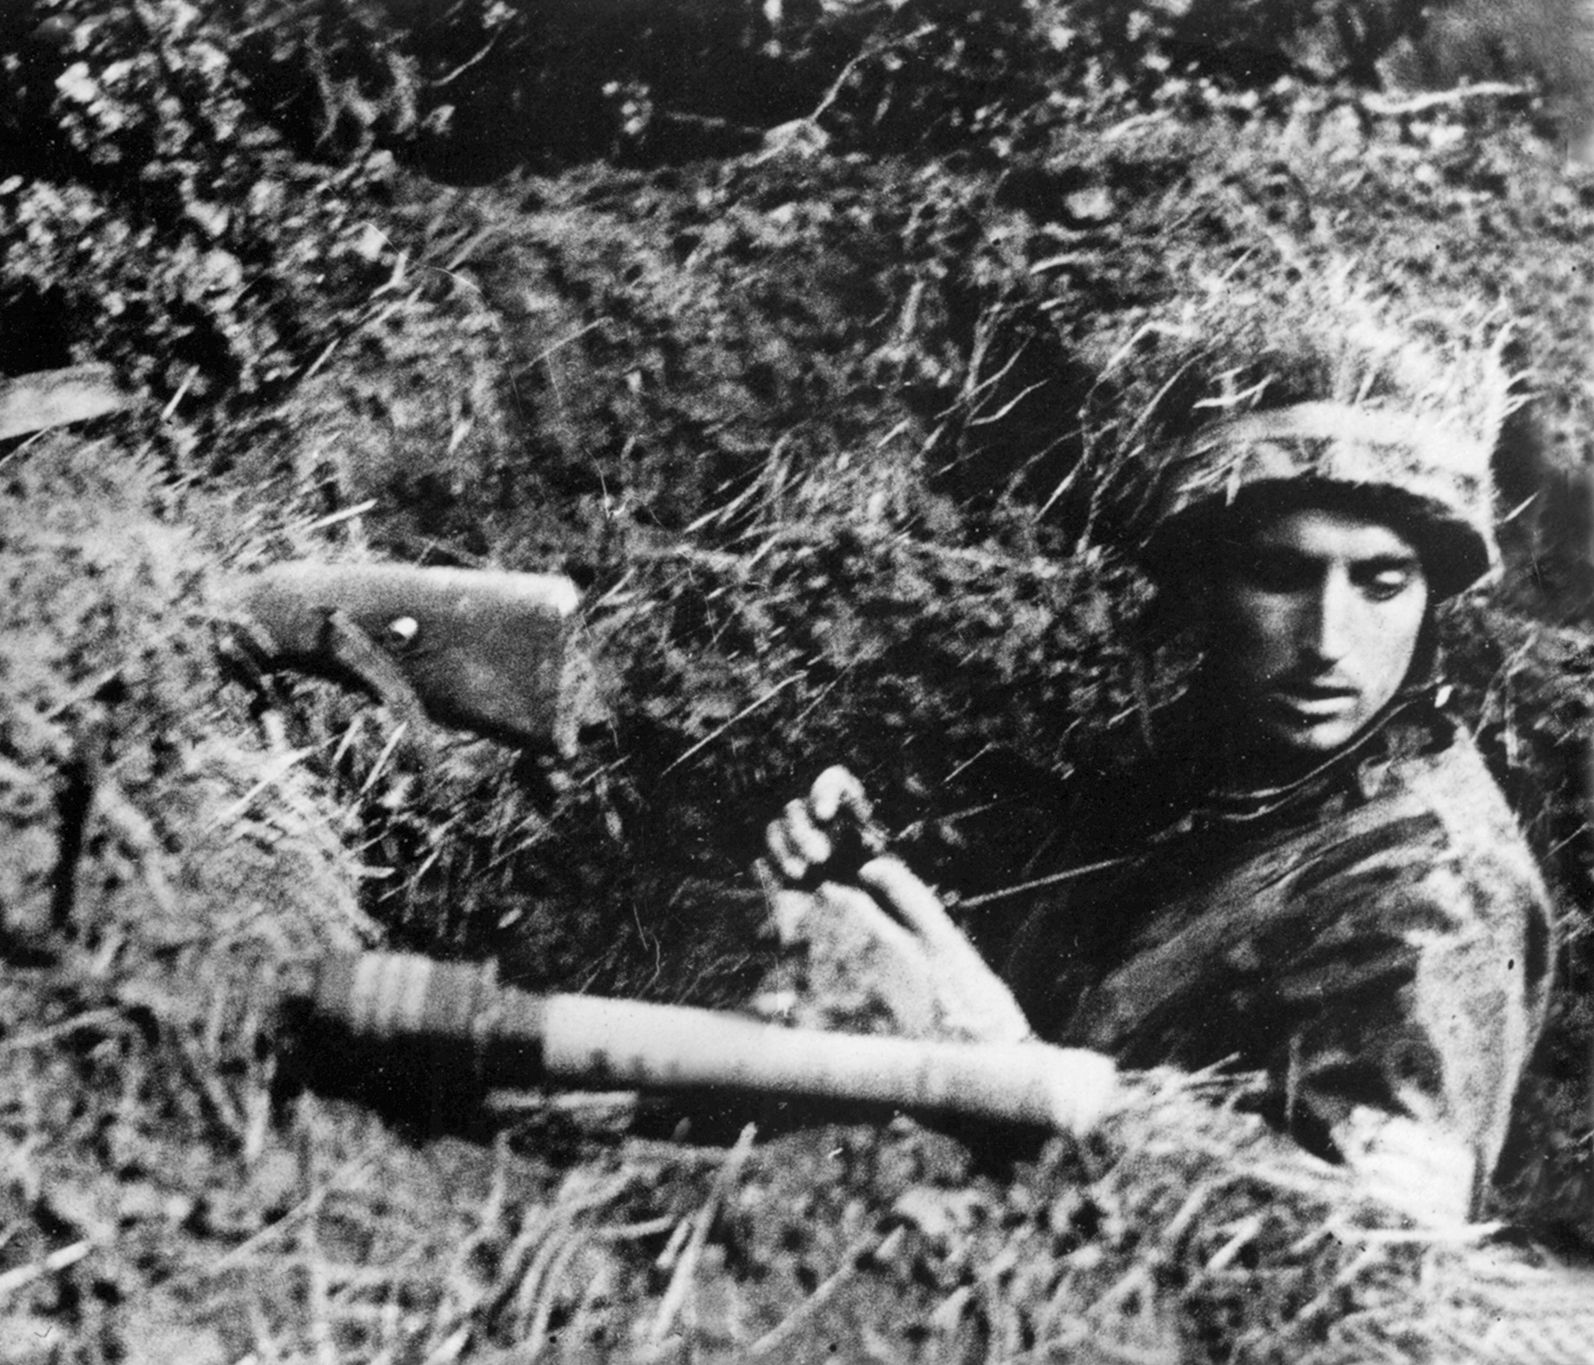 Elite German Fallschirmjagers of the 5th Parachute Division, such as this one armed with rifle and stick grenade in a foxhole, fought stubbornly against the advancing Americans.